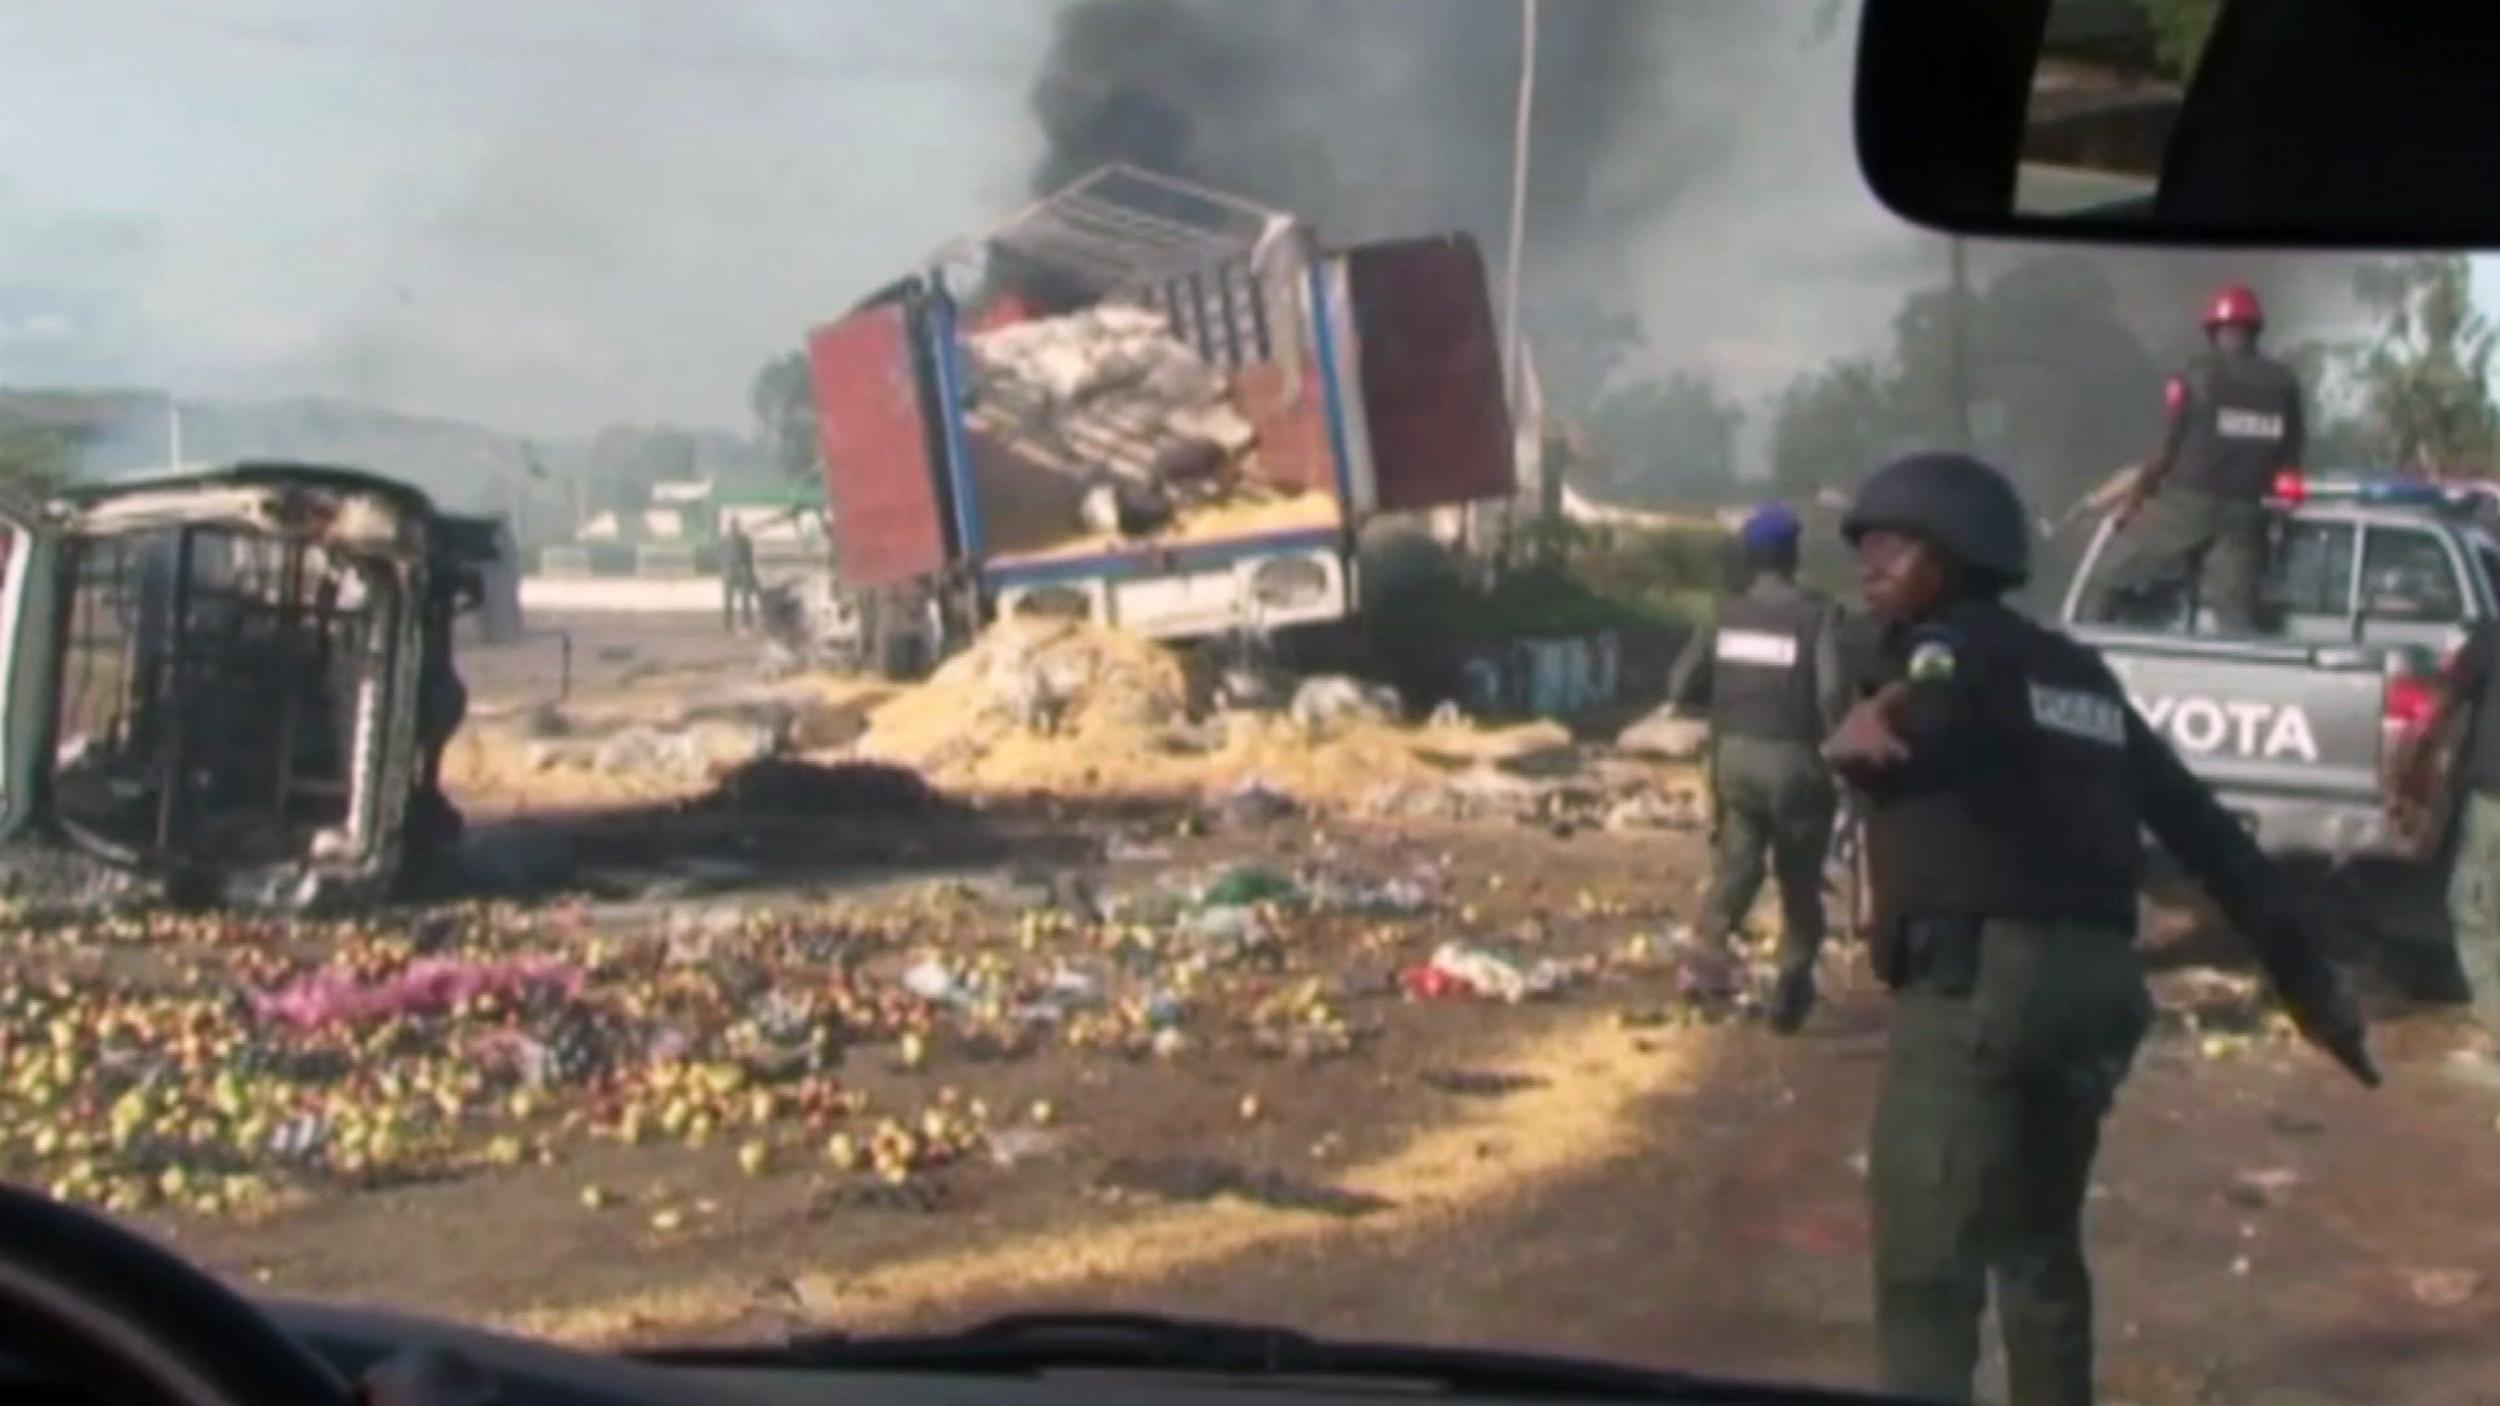 Destroyed vehicles and debris is strewn across the road as police attempt to restore calm in the town of Jos, Nigeria